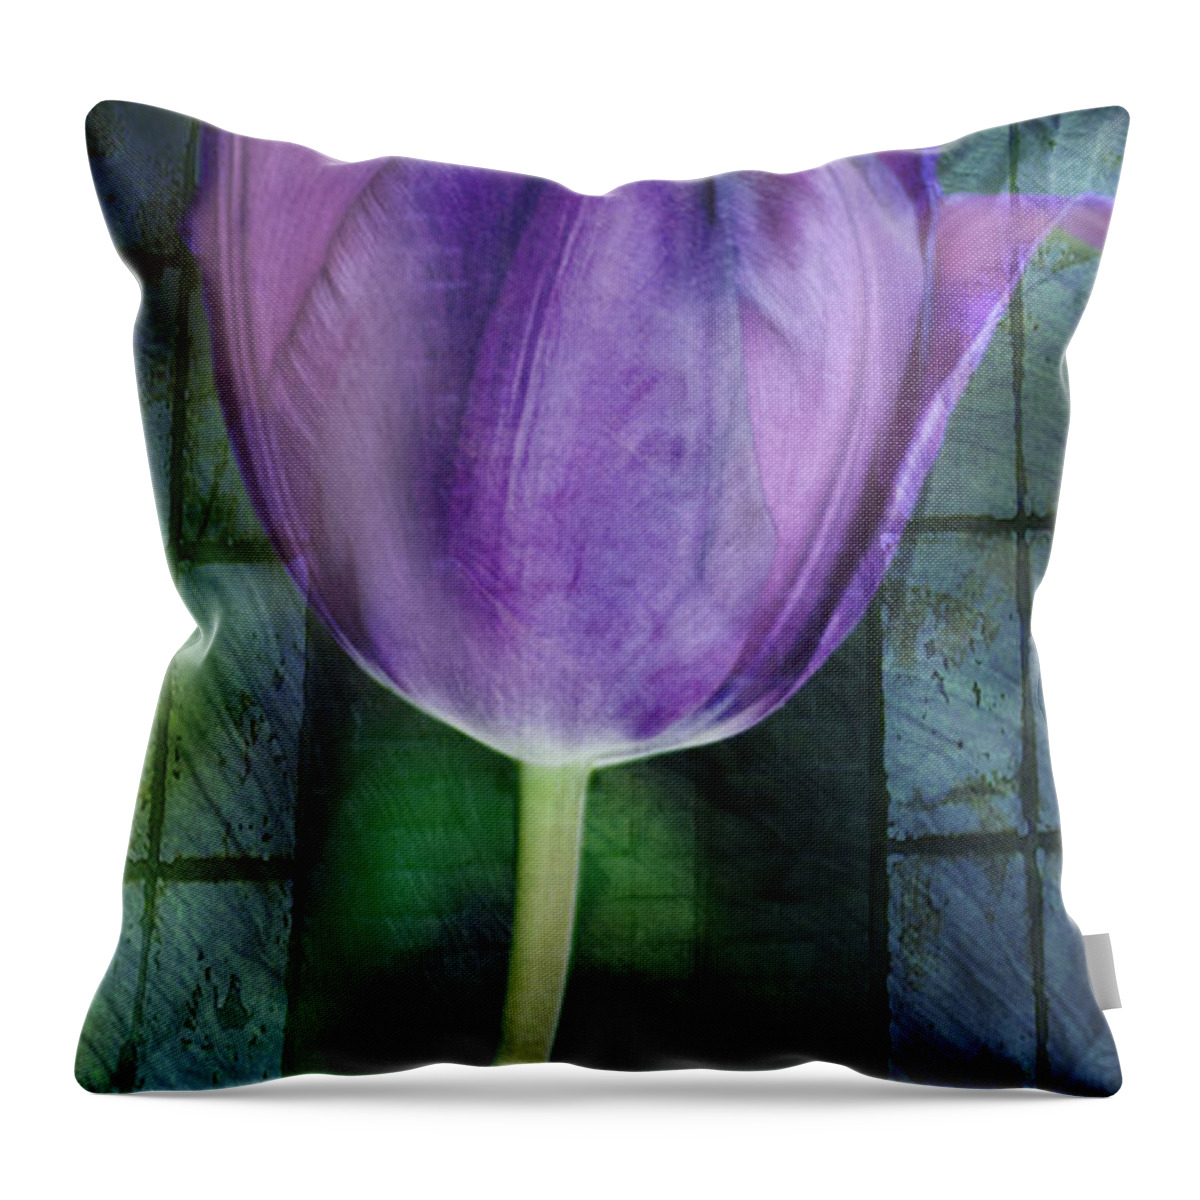 Tulip Throw Pillow featuring the photograph Passionate Purple by Trish Tritz